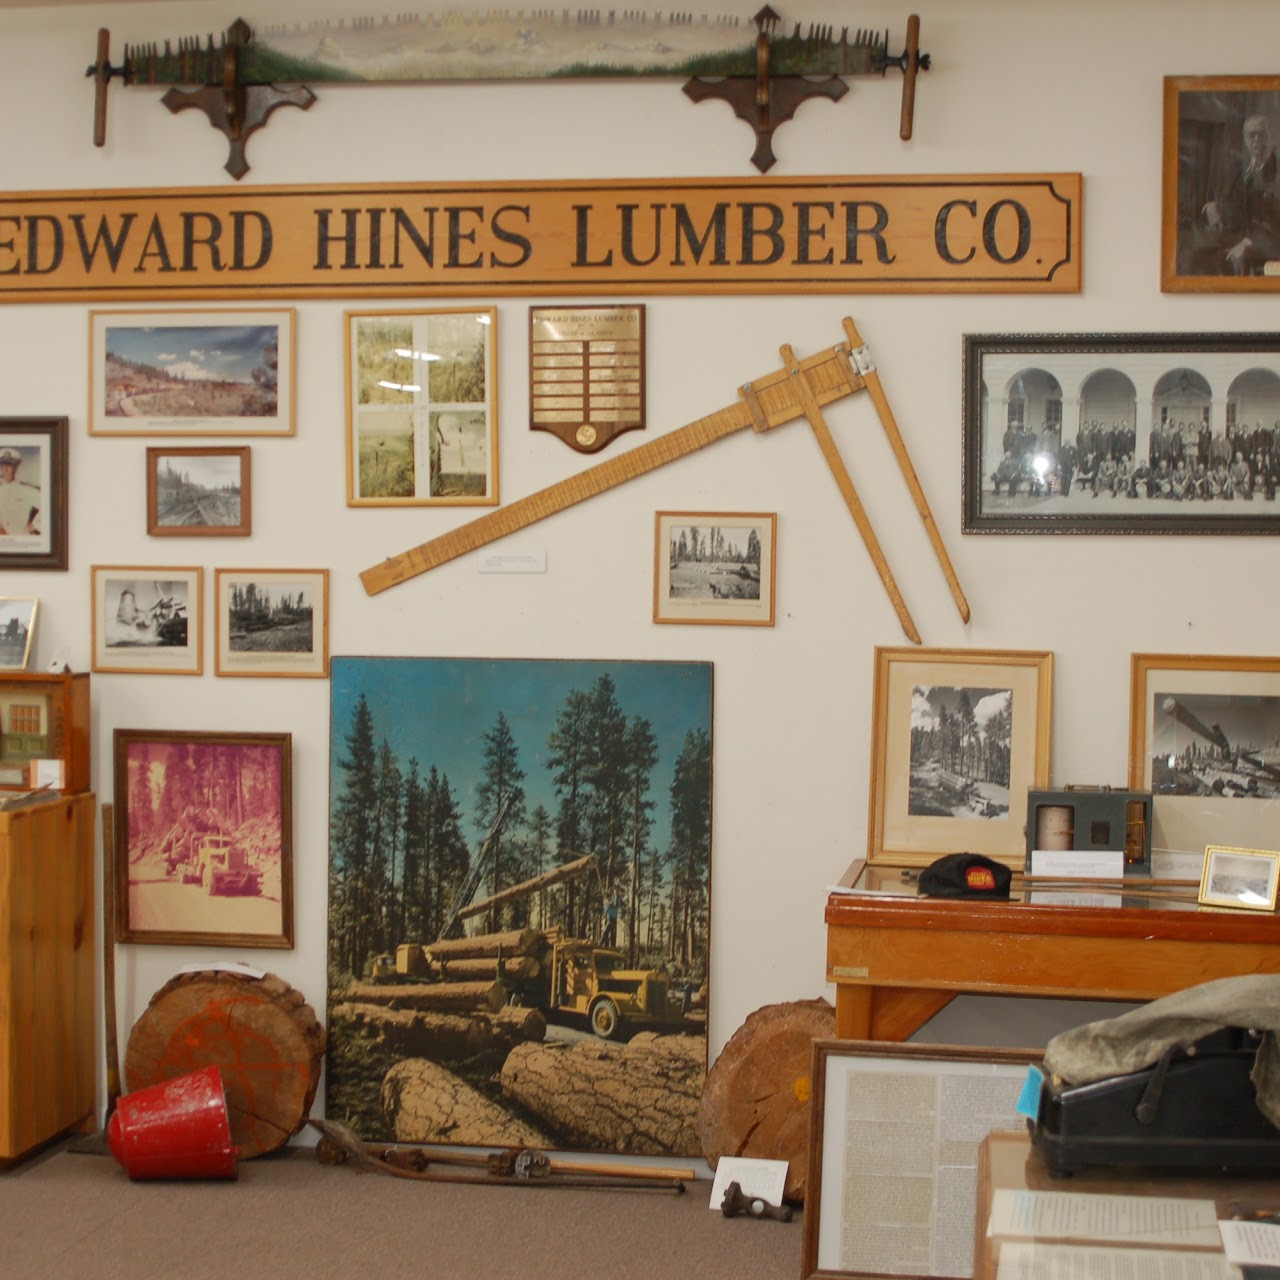 Harney County Historical Museum